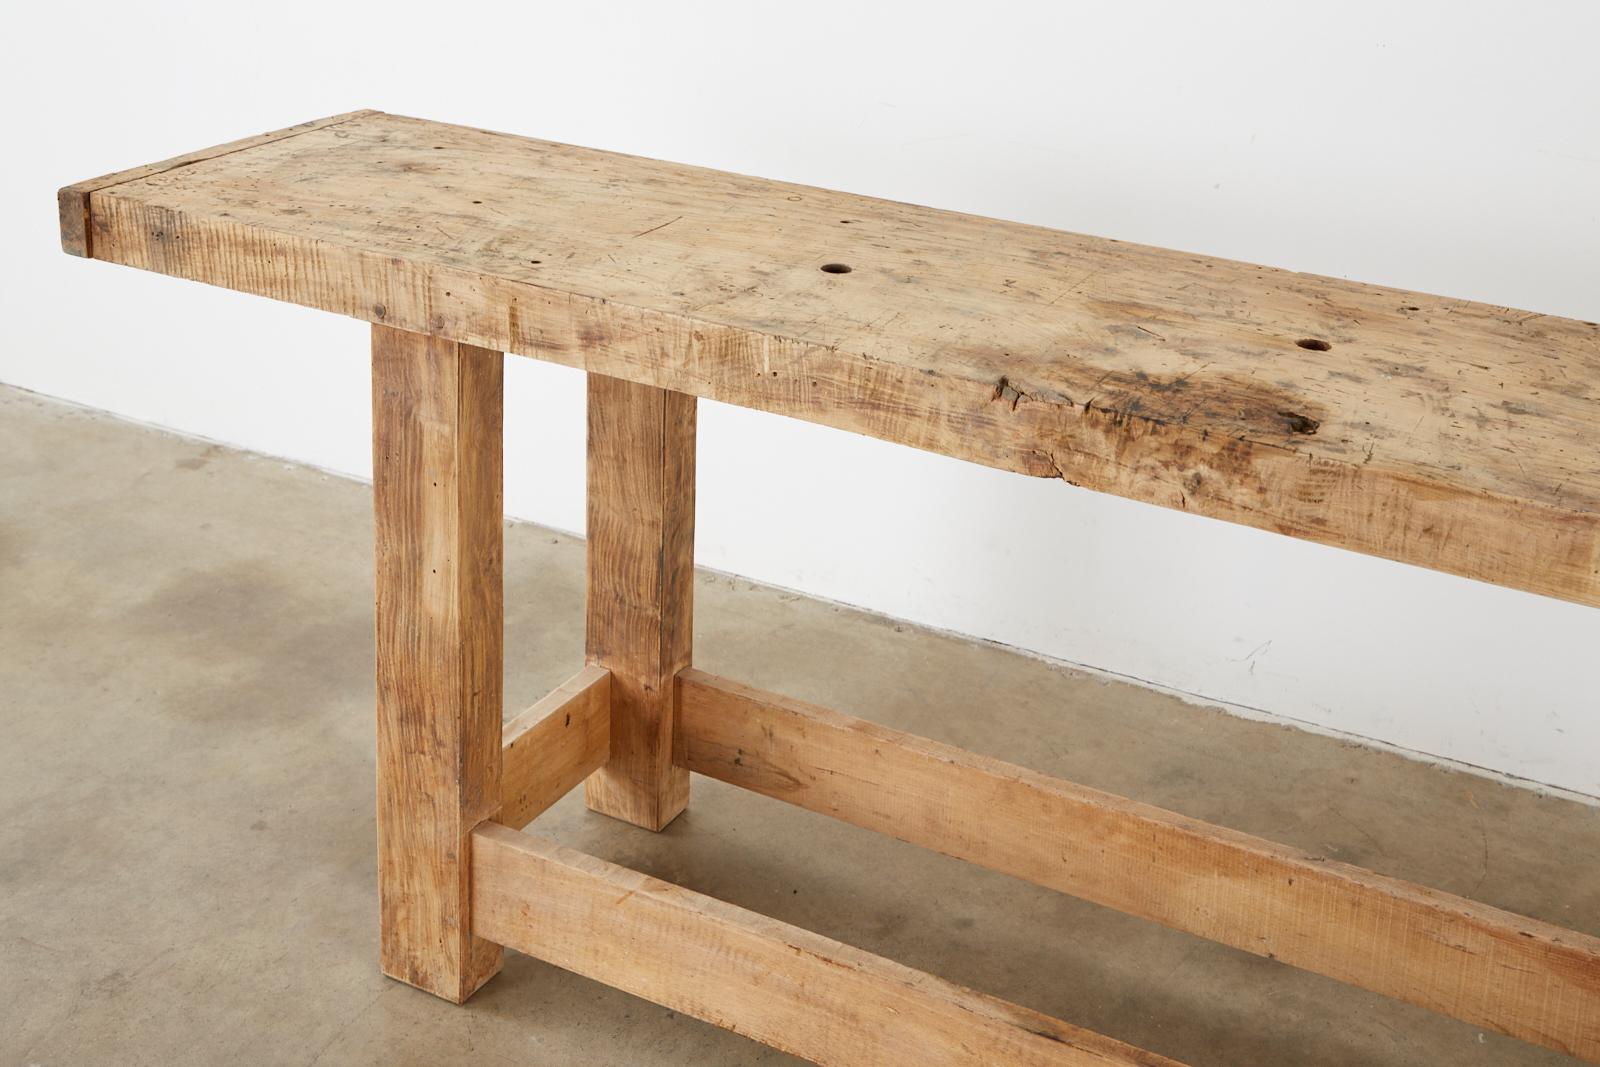 Repurposed early 20th century industrial style carpenter's workbench. Crafted from a large wood timber that appears to be walnut. The massive top features a 3 inch thick solid plank with breadboard ends. Supported by thick, square legs conjoined by